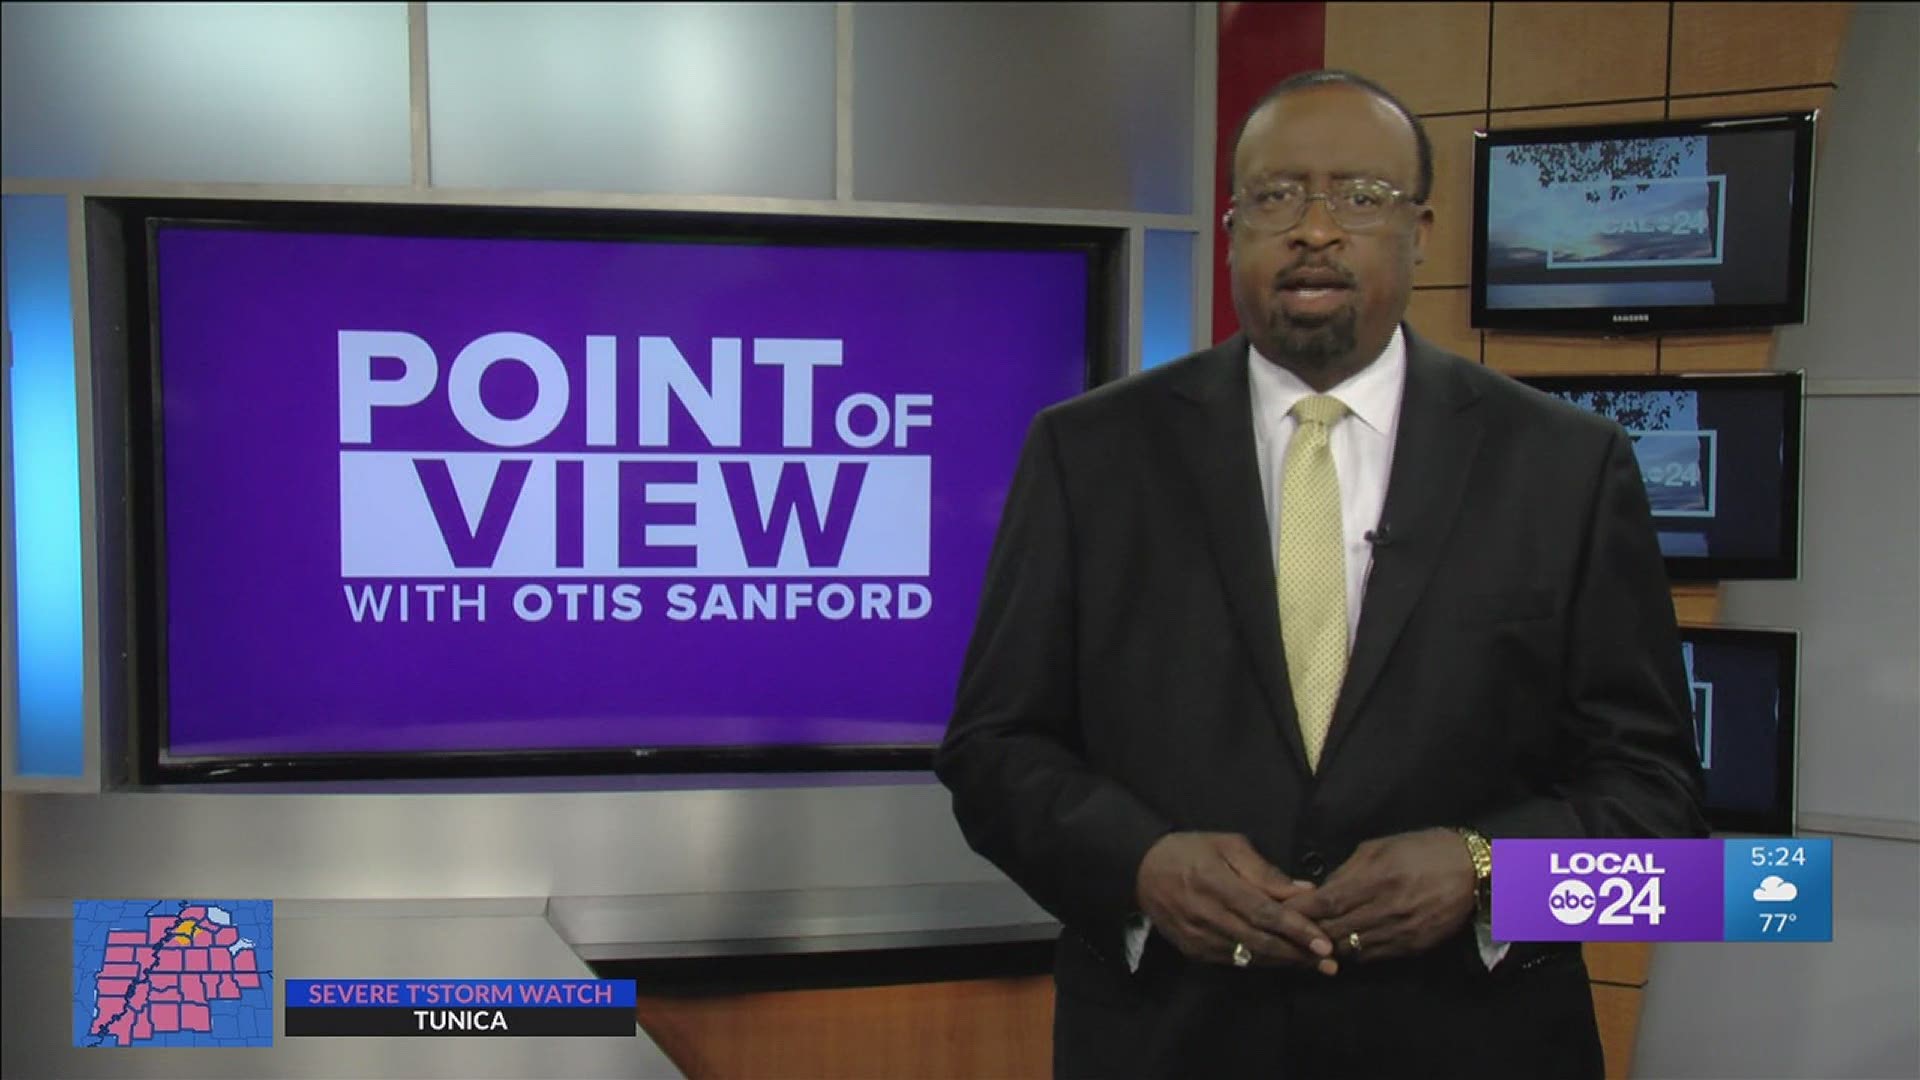 Local 24 News political analyst and commentator Otis Sanford shares his point of view on former Sen. Bob Corker’s look back at his time in the Senate.